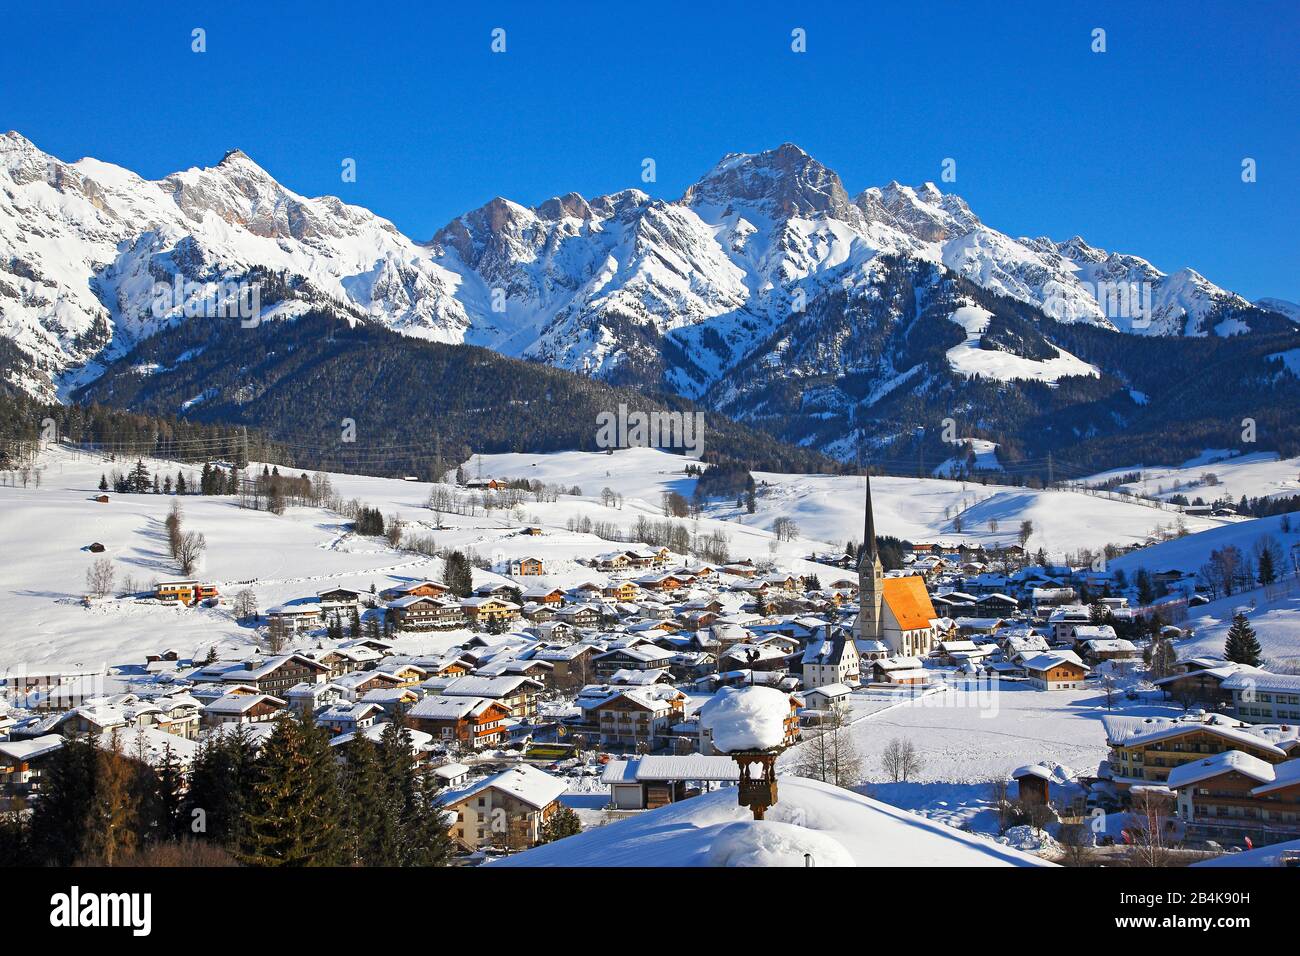 Top view of Maria Alm on the Steinernen Meer in winter with blue sky in landscape format, Stock Photo